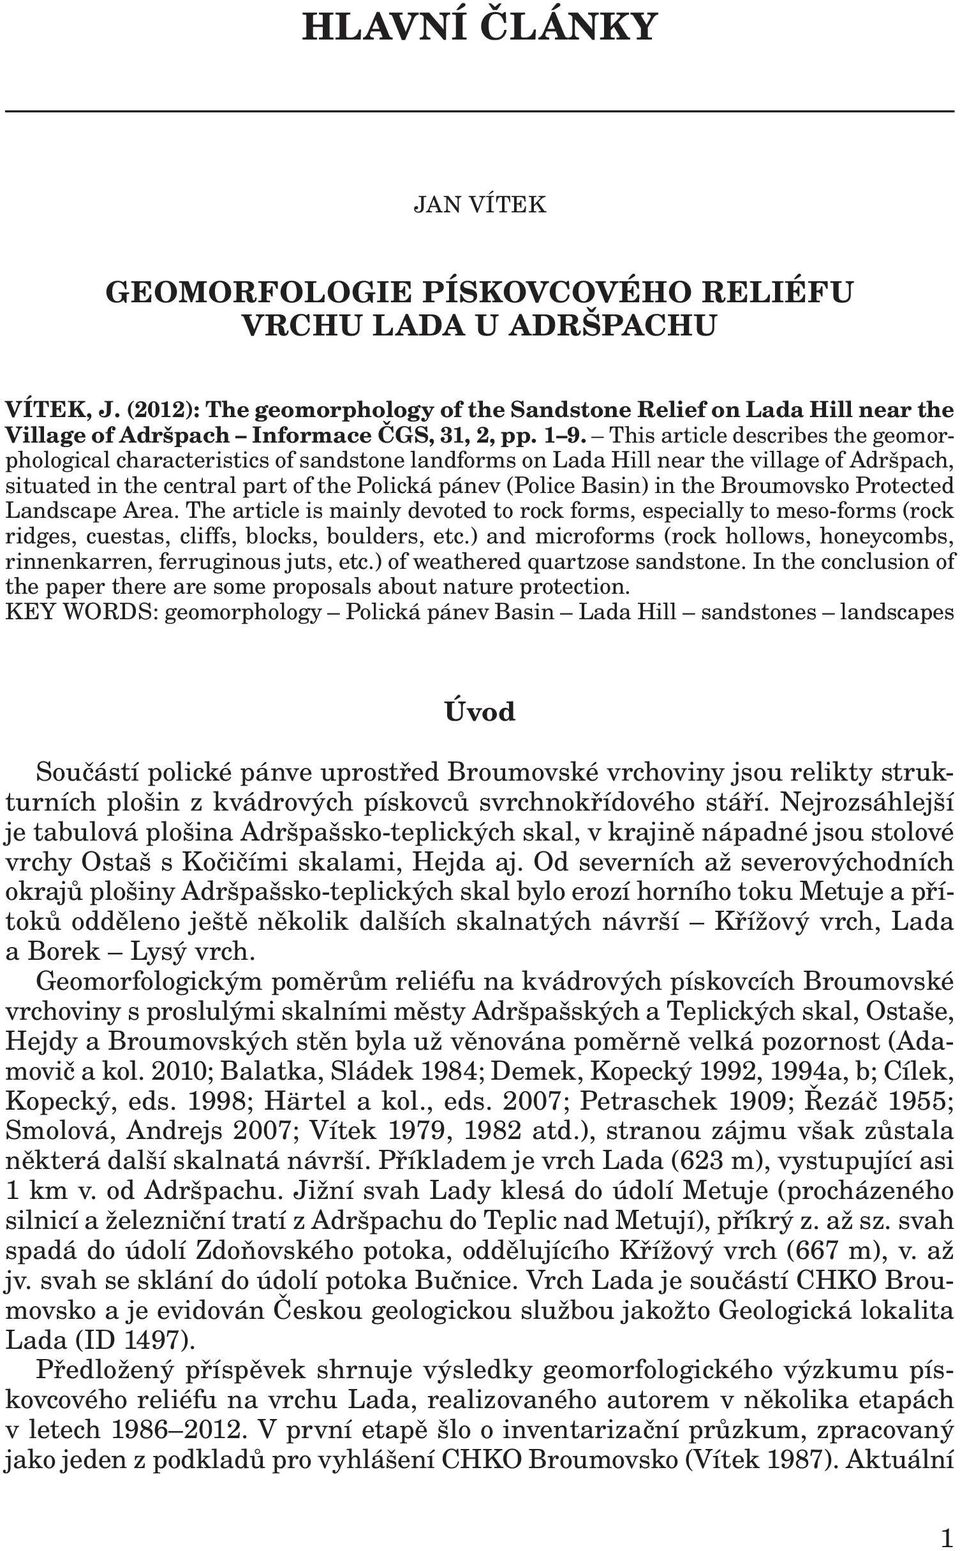 This article describes the geomorphological characteristics of sandstone landforms on Lada Hill near the village of Adršpach, situated in the central part of the Polická pánev (Police Basin) in the